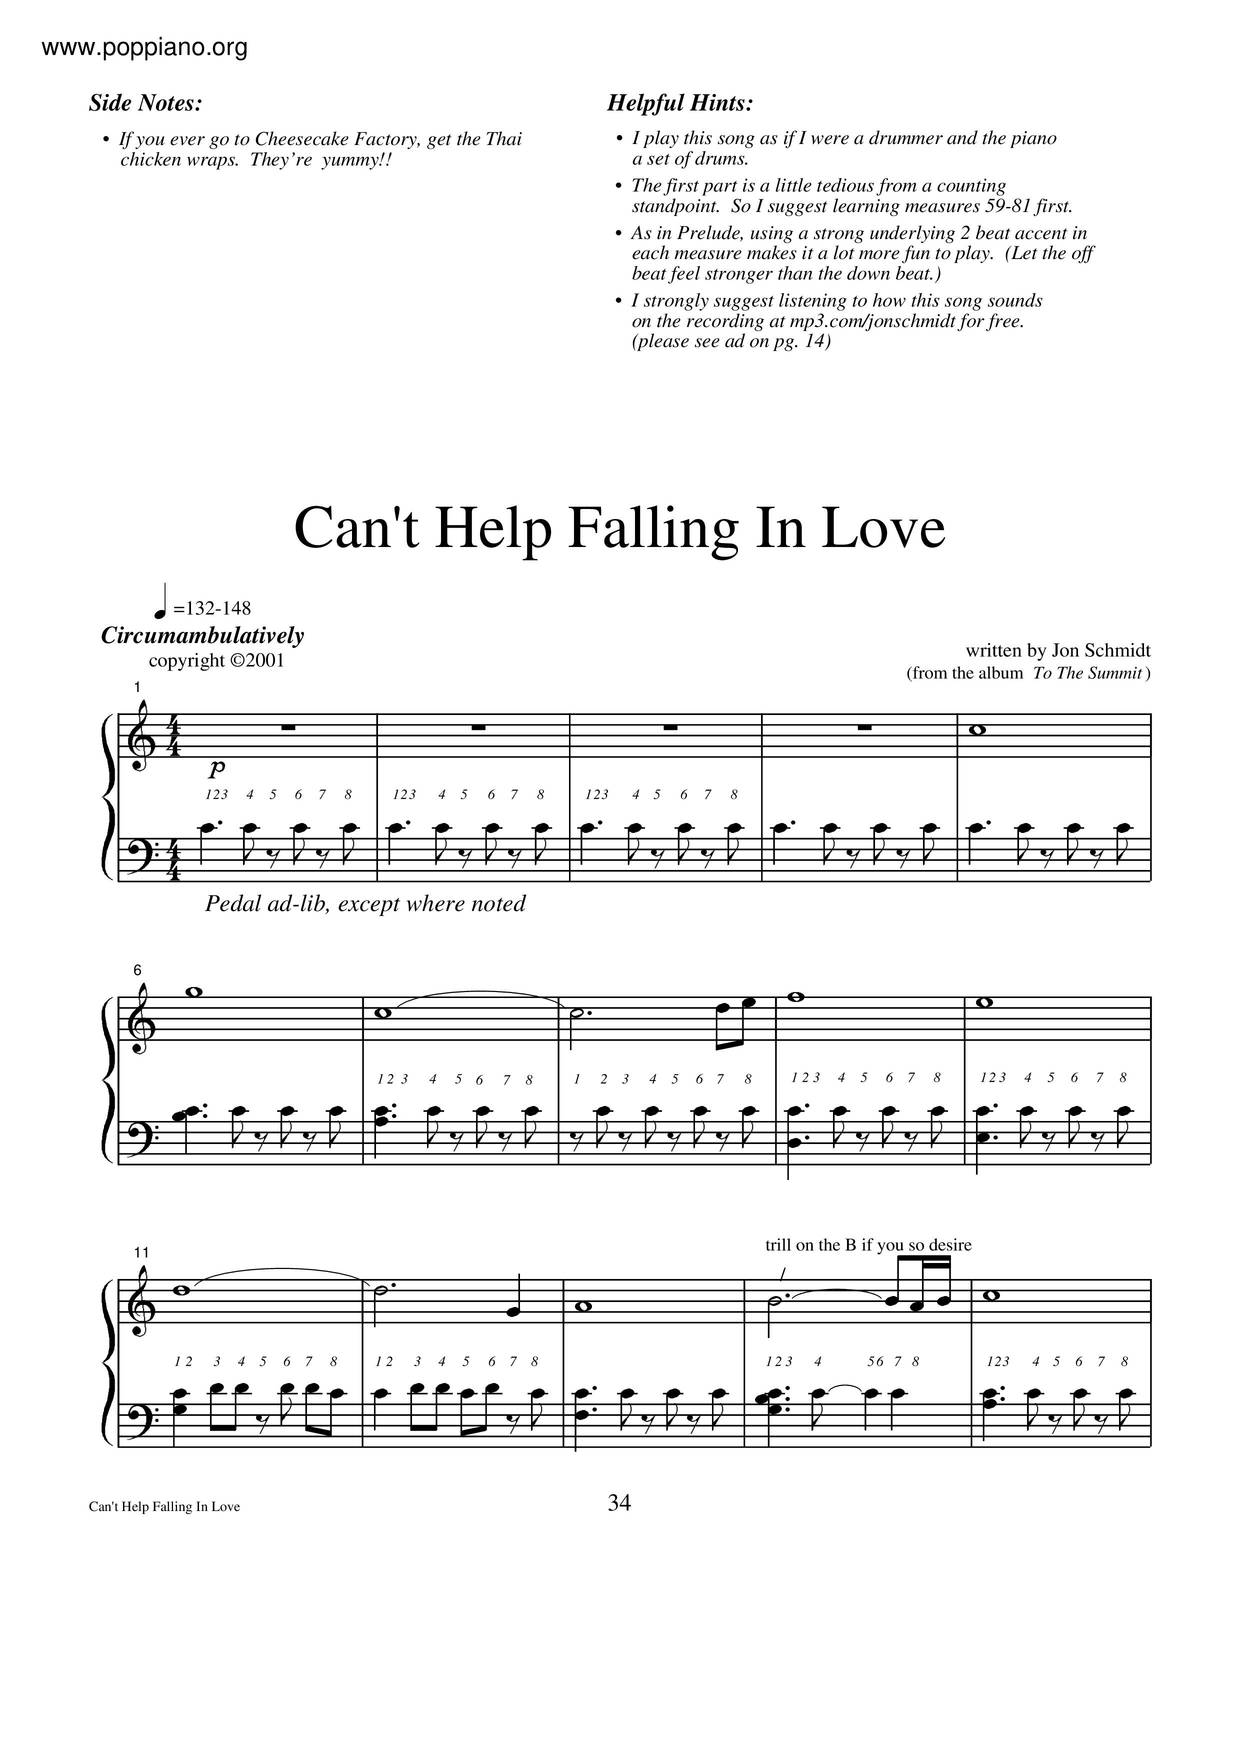 Can't Help Falling In Loveピアノ譜